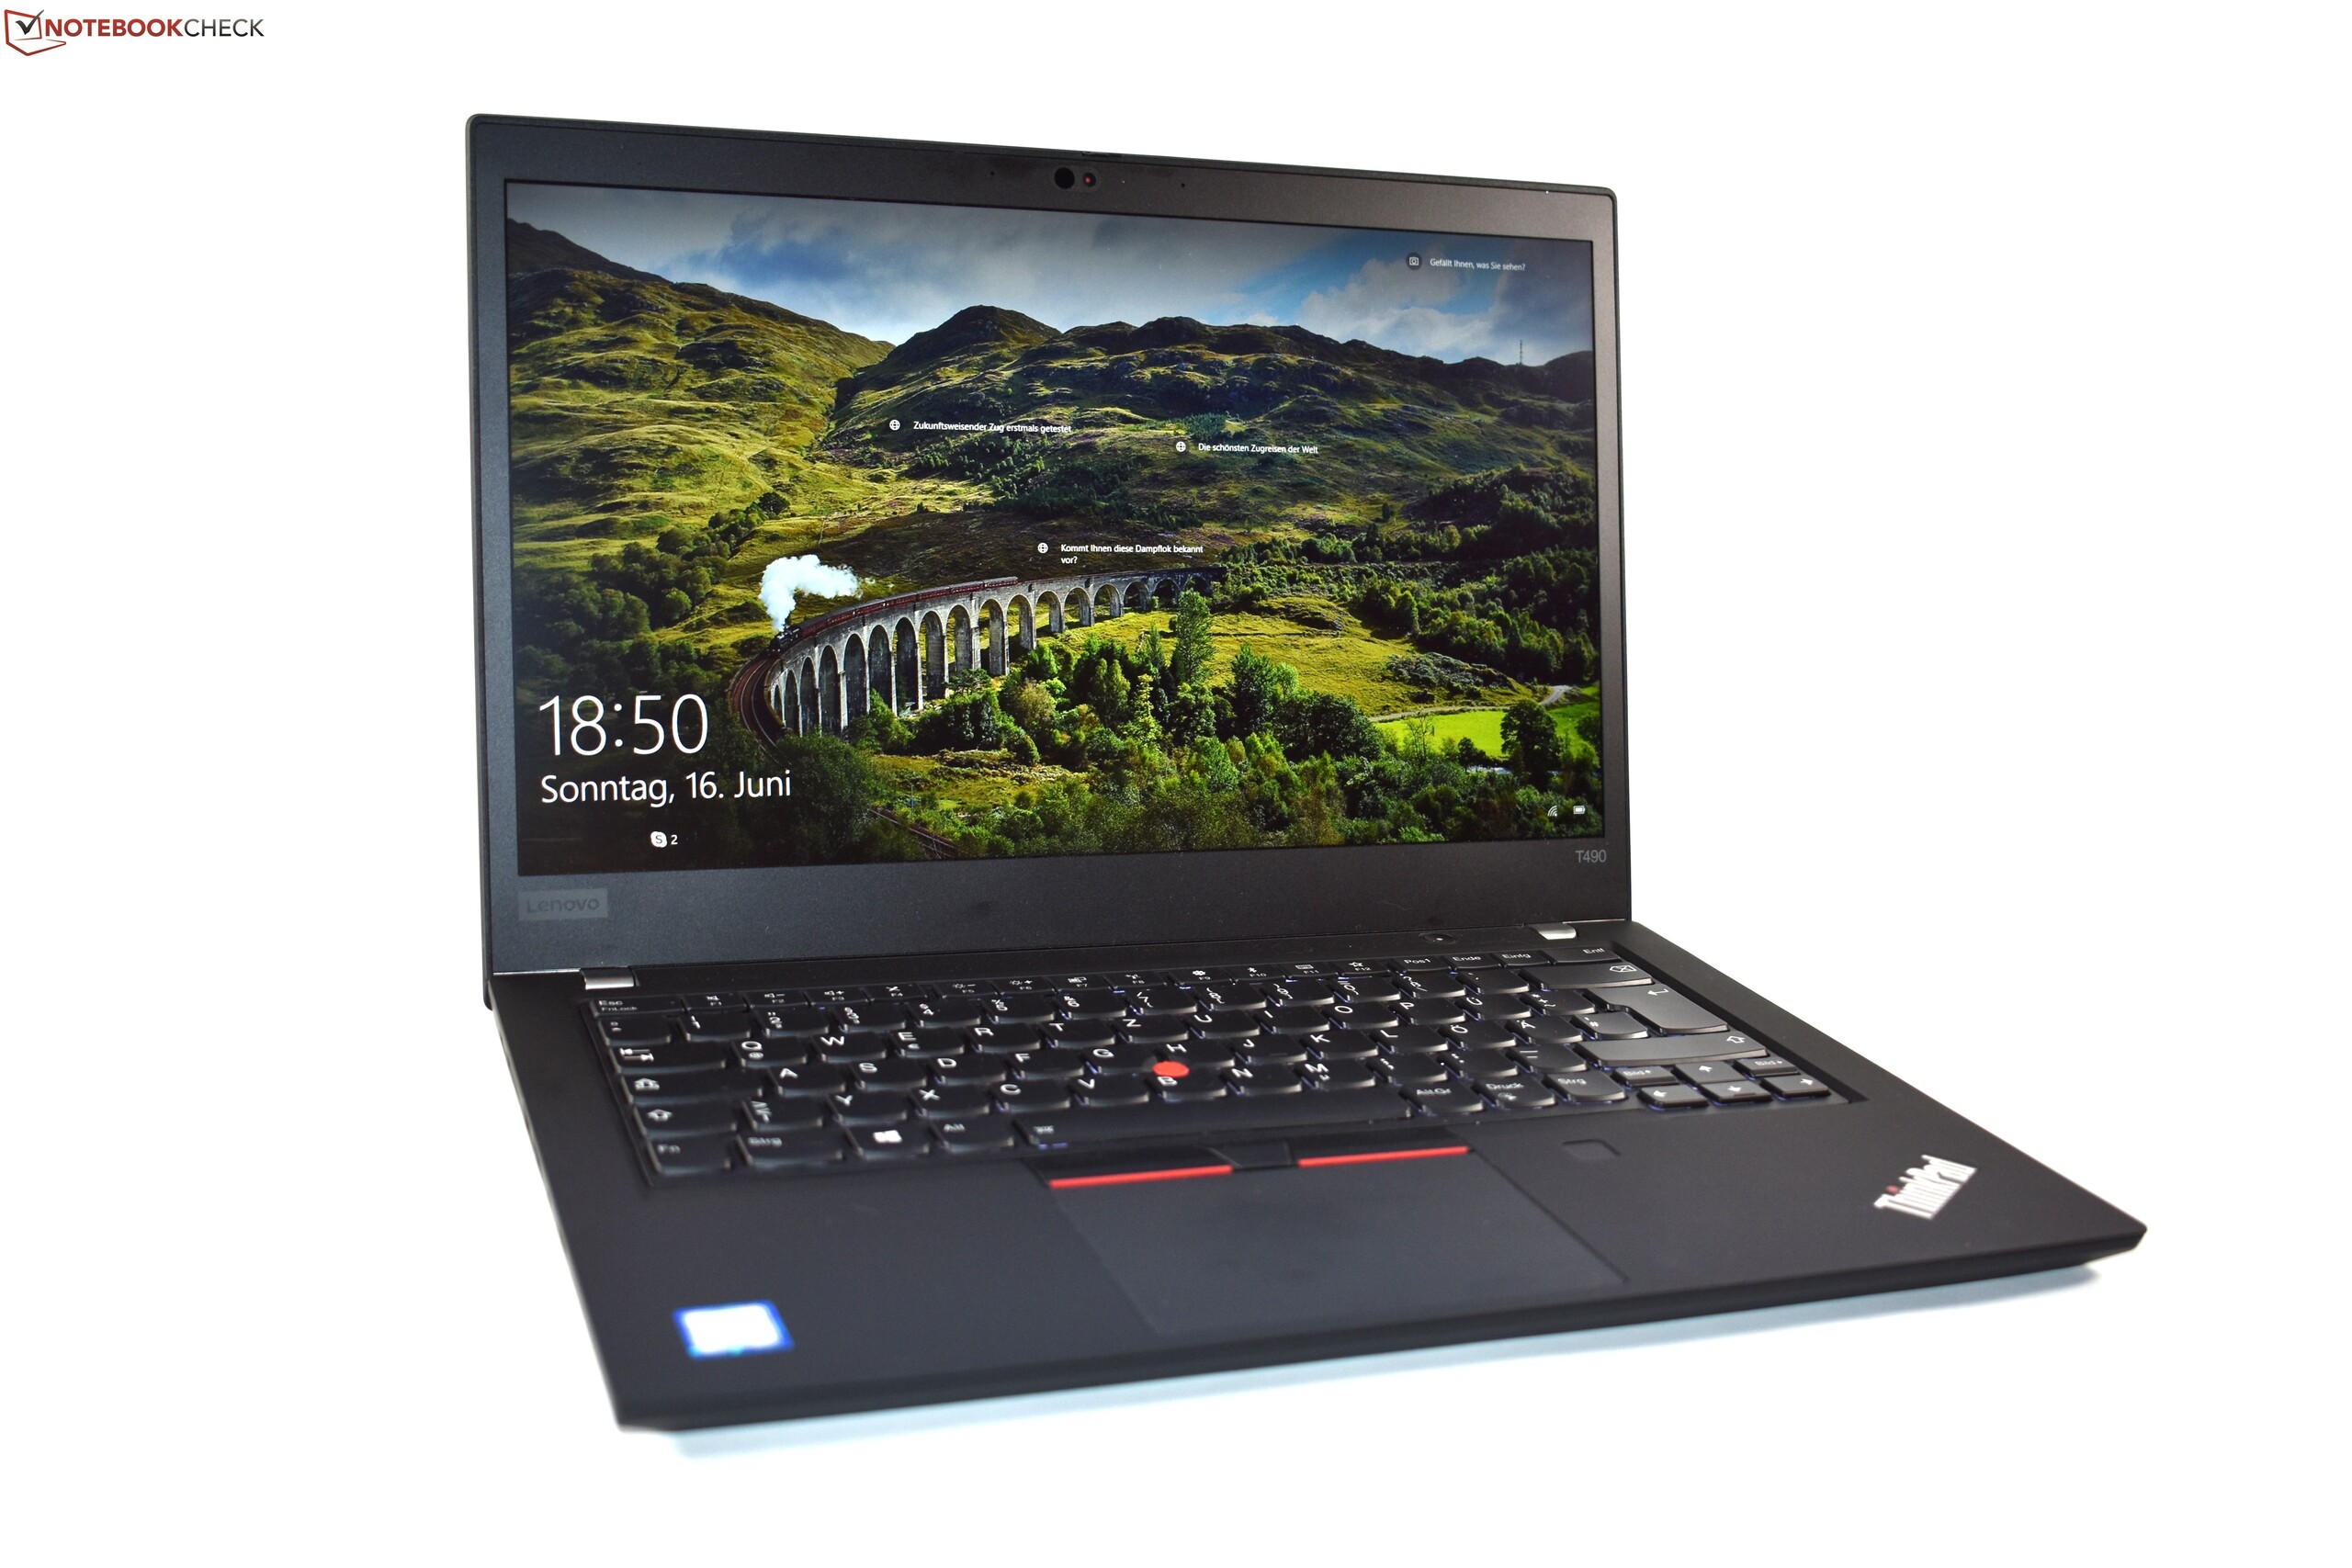 Lenovo ThinkPad T490 Laptop Review: A business laptop with long